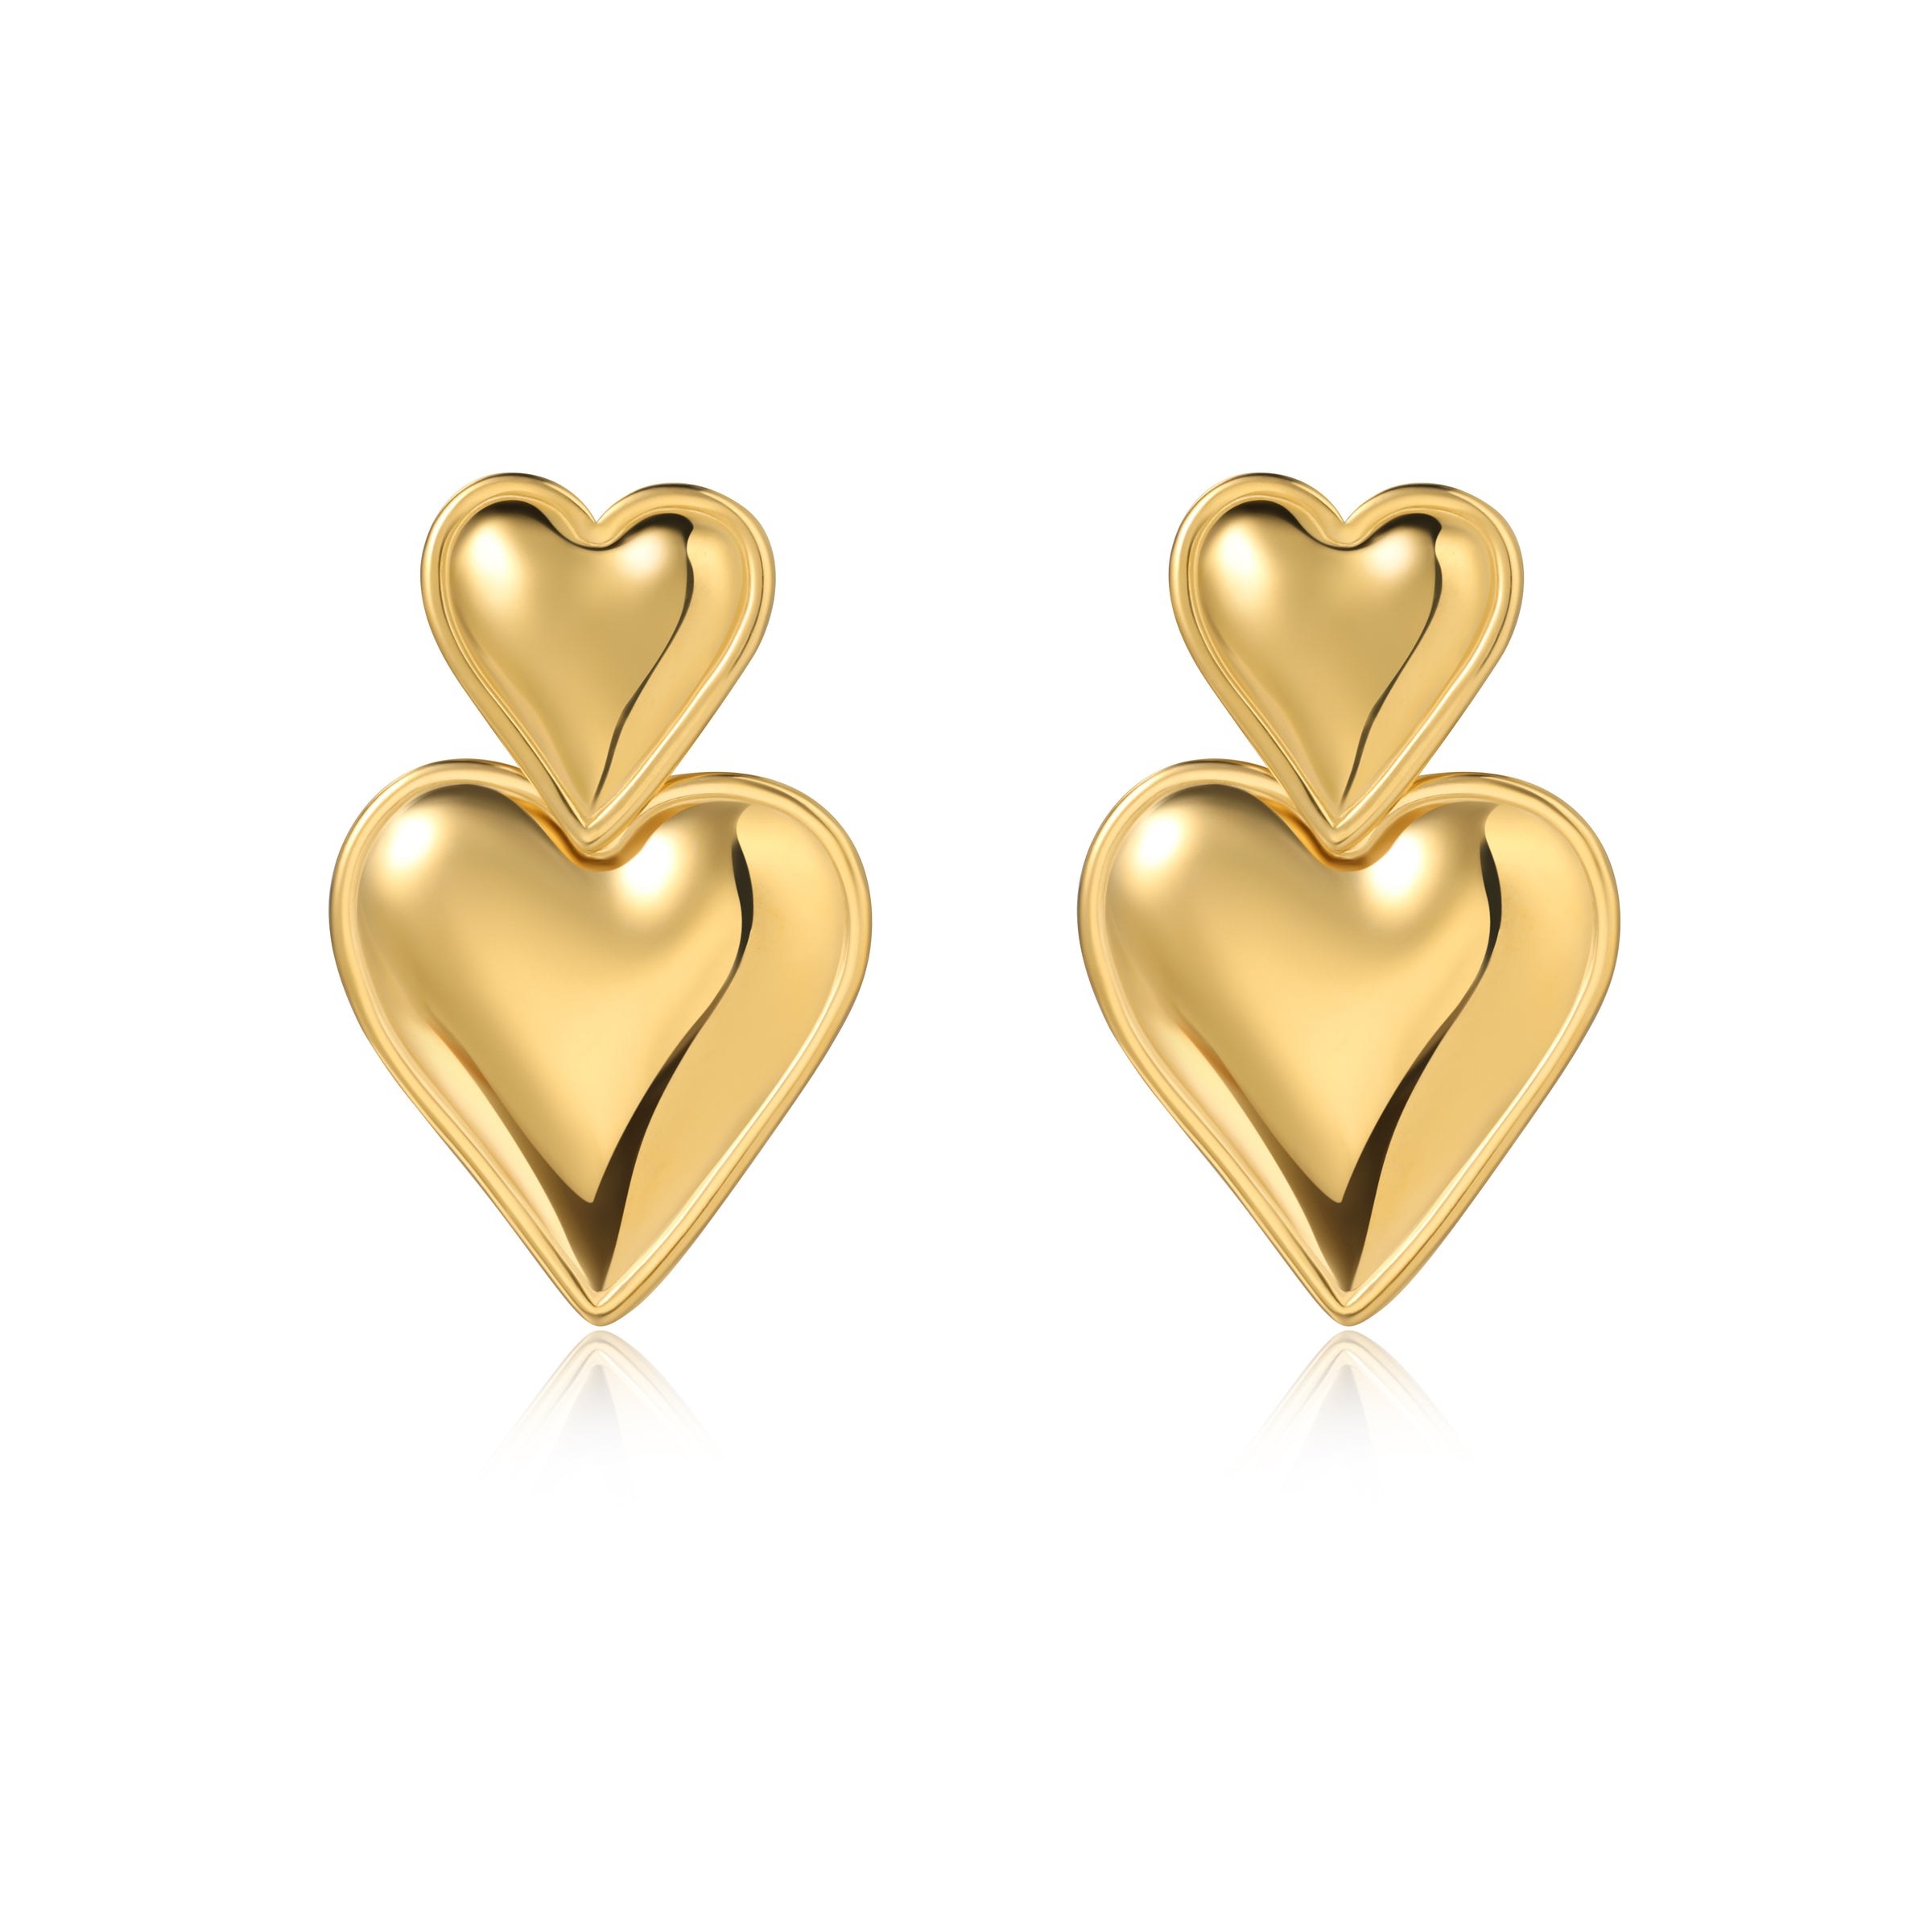 Shop Jewellery Online - Urith Heart Earring In Gold With Diamonds